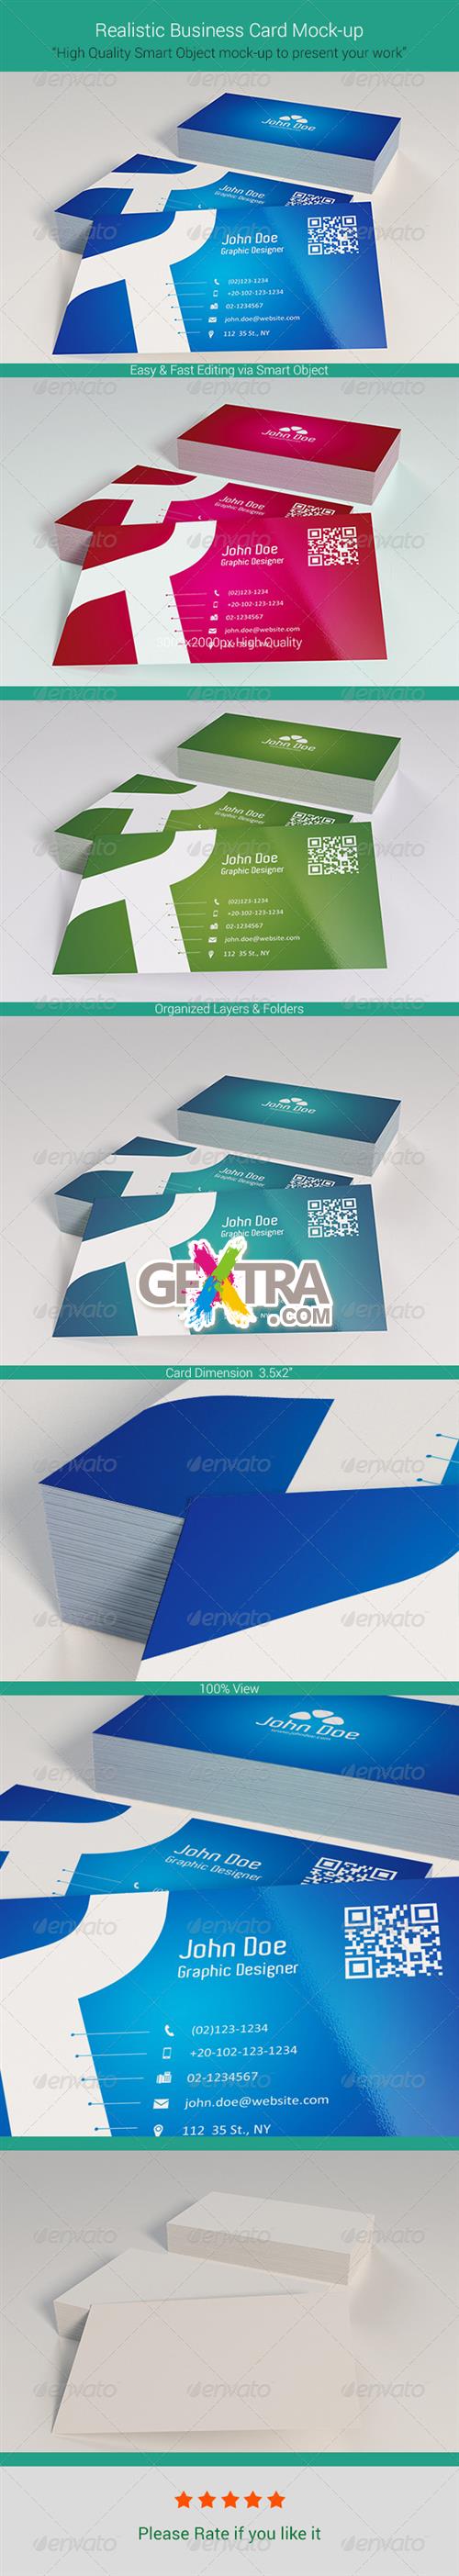 GraphicRiver Realistic Business Card Mock-Up 6042400